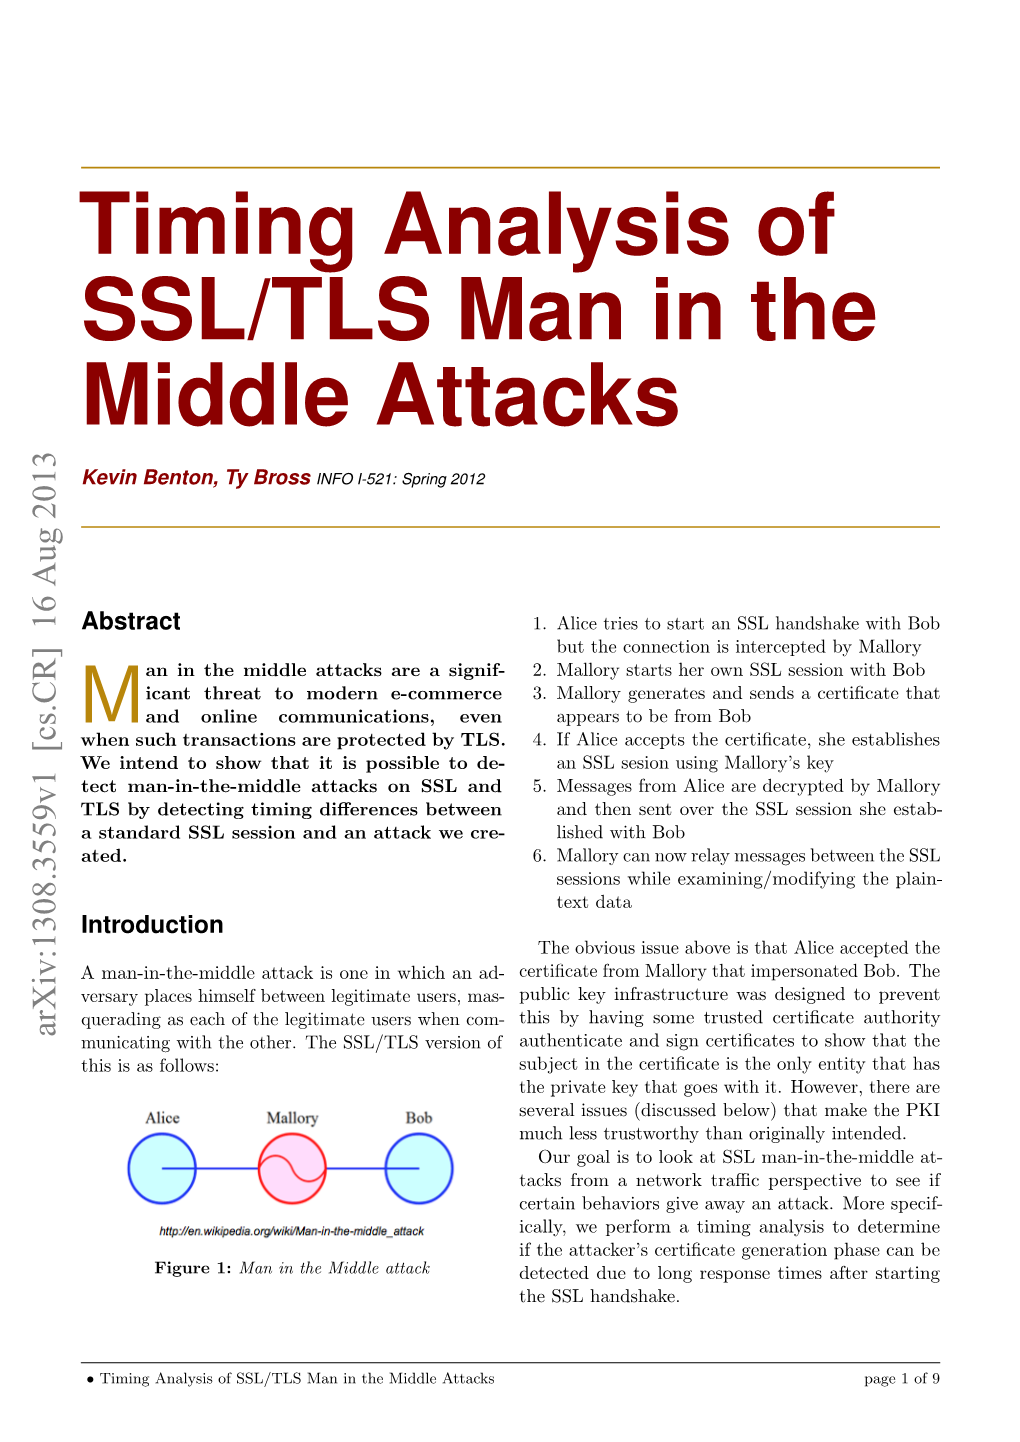 Timing Analysis of SSL/TLS Man in the Middle Attacks